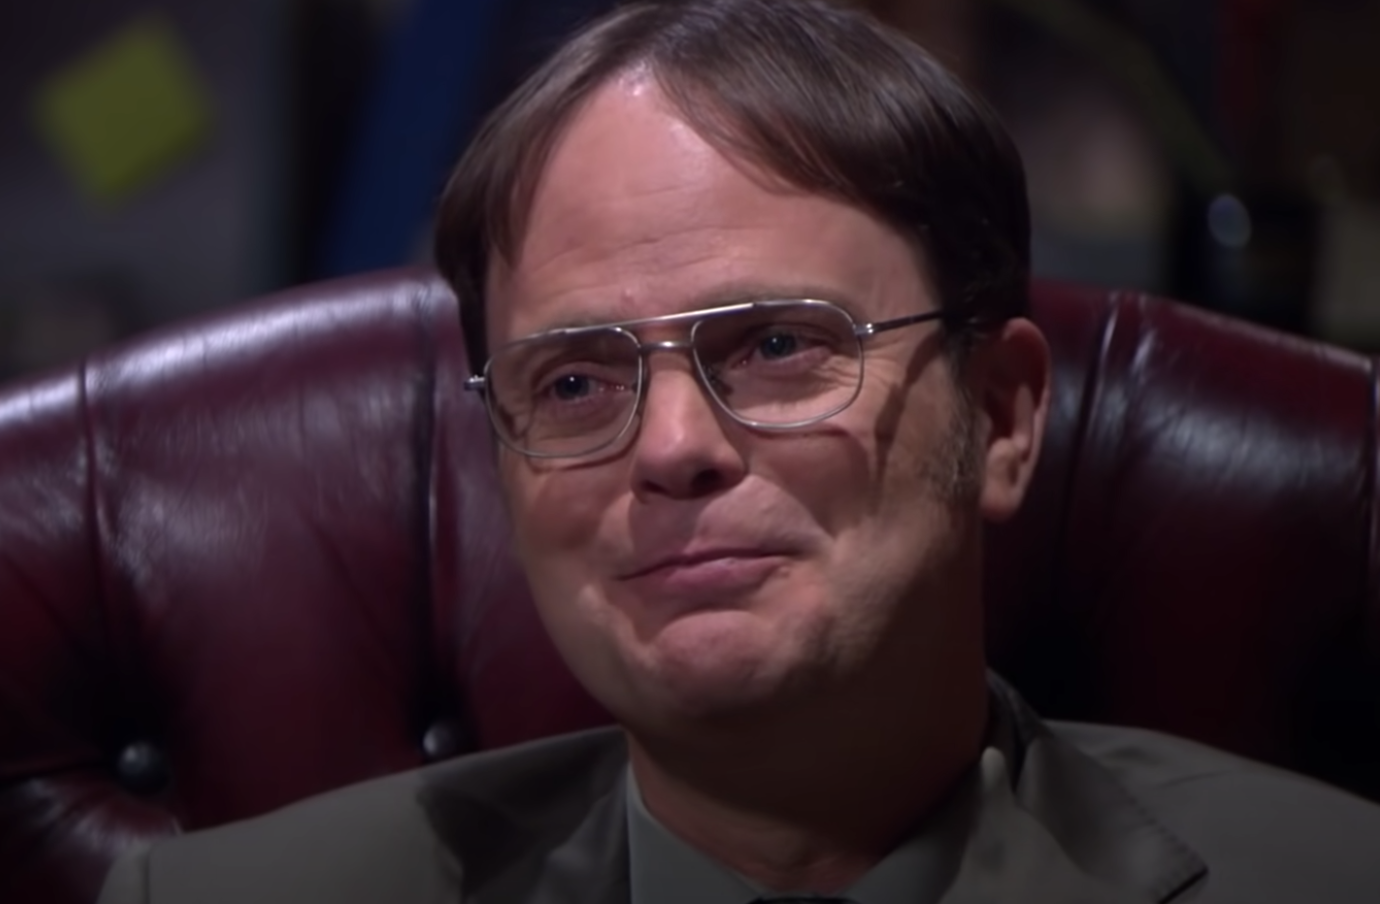 Dwight smiles in his chair